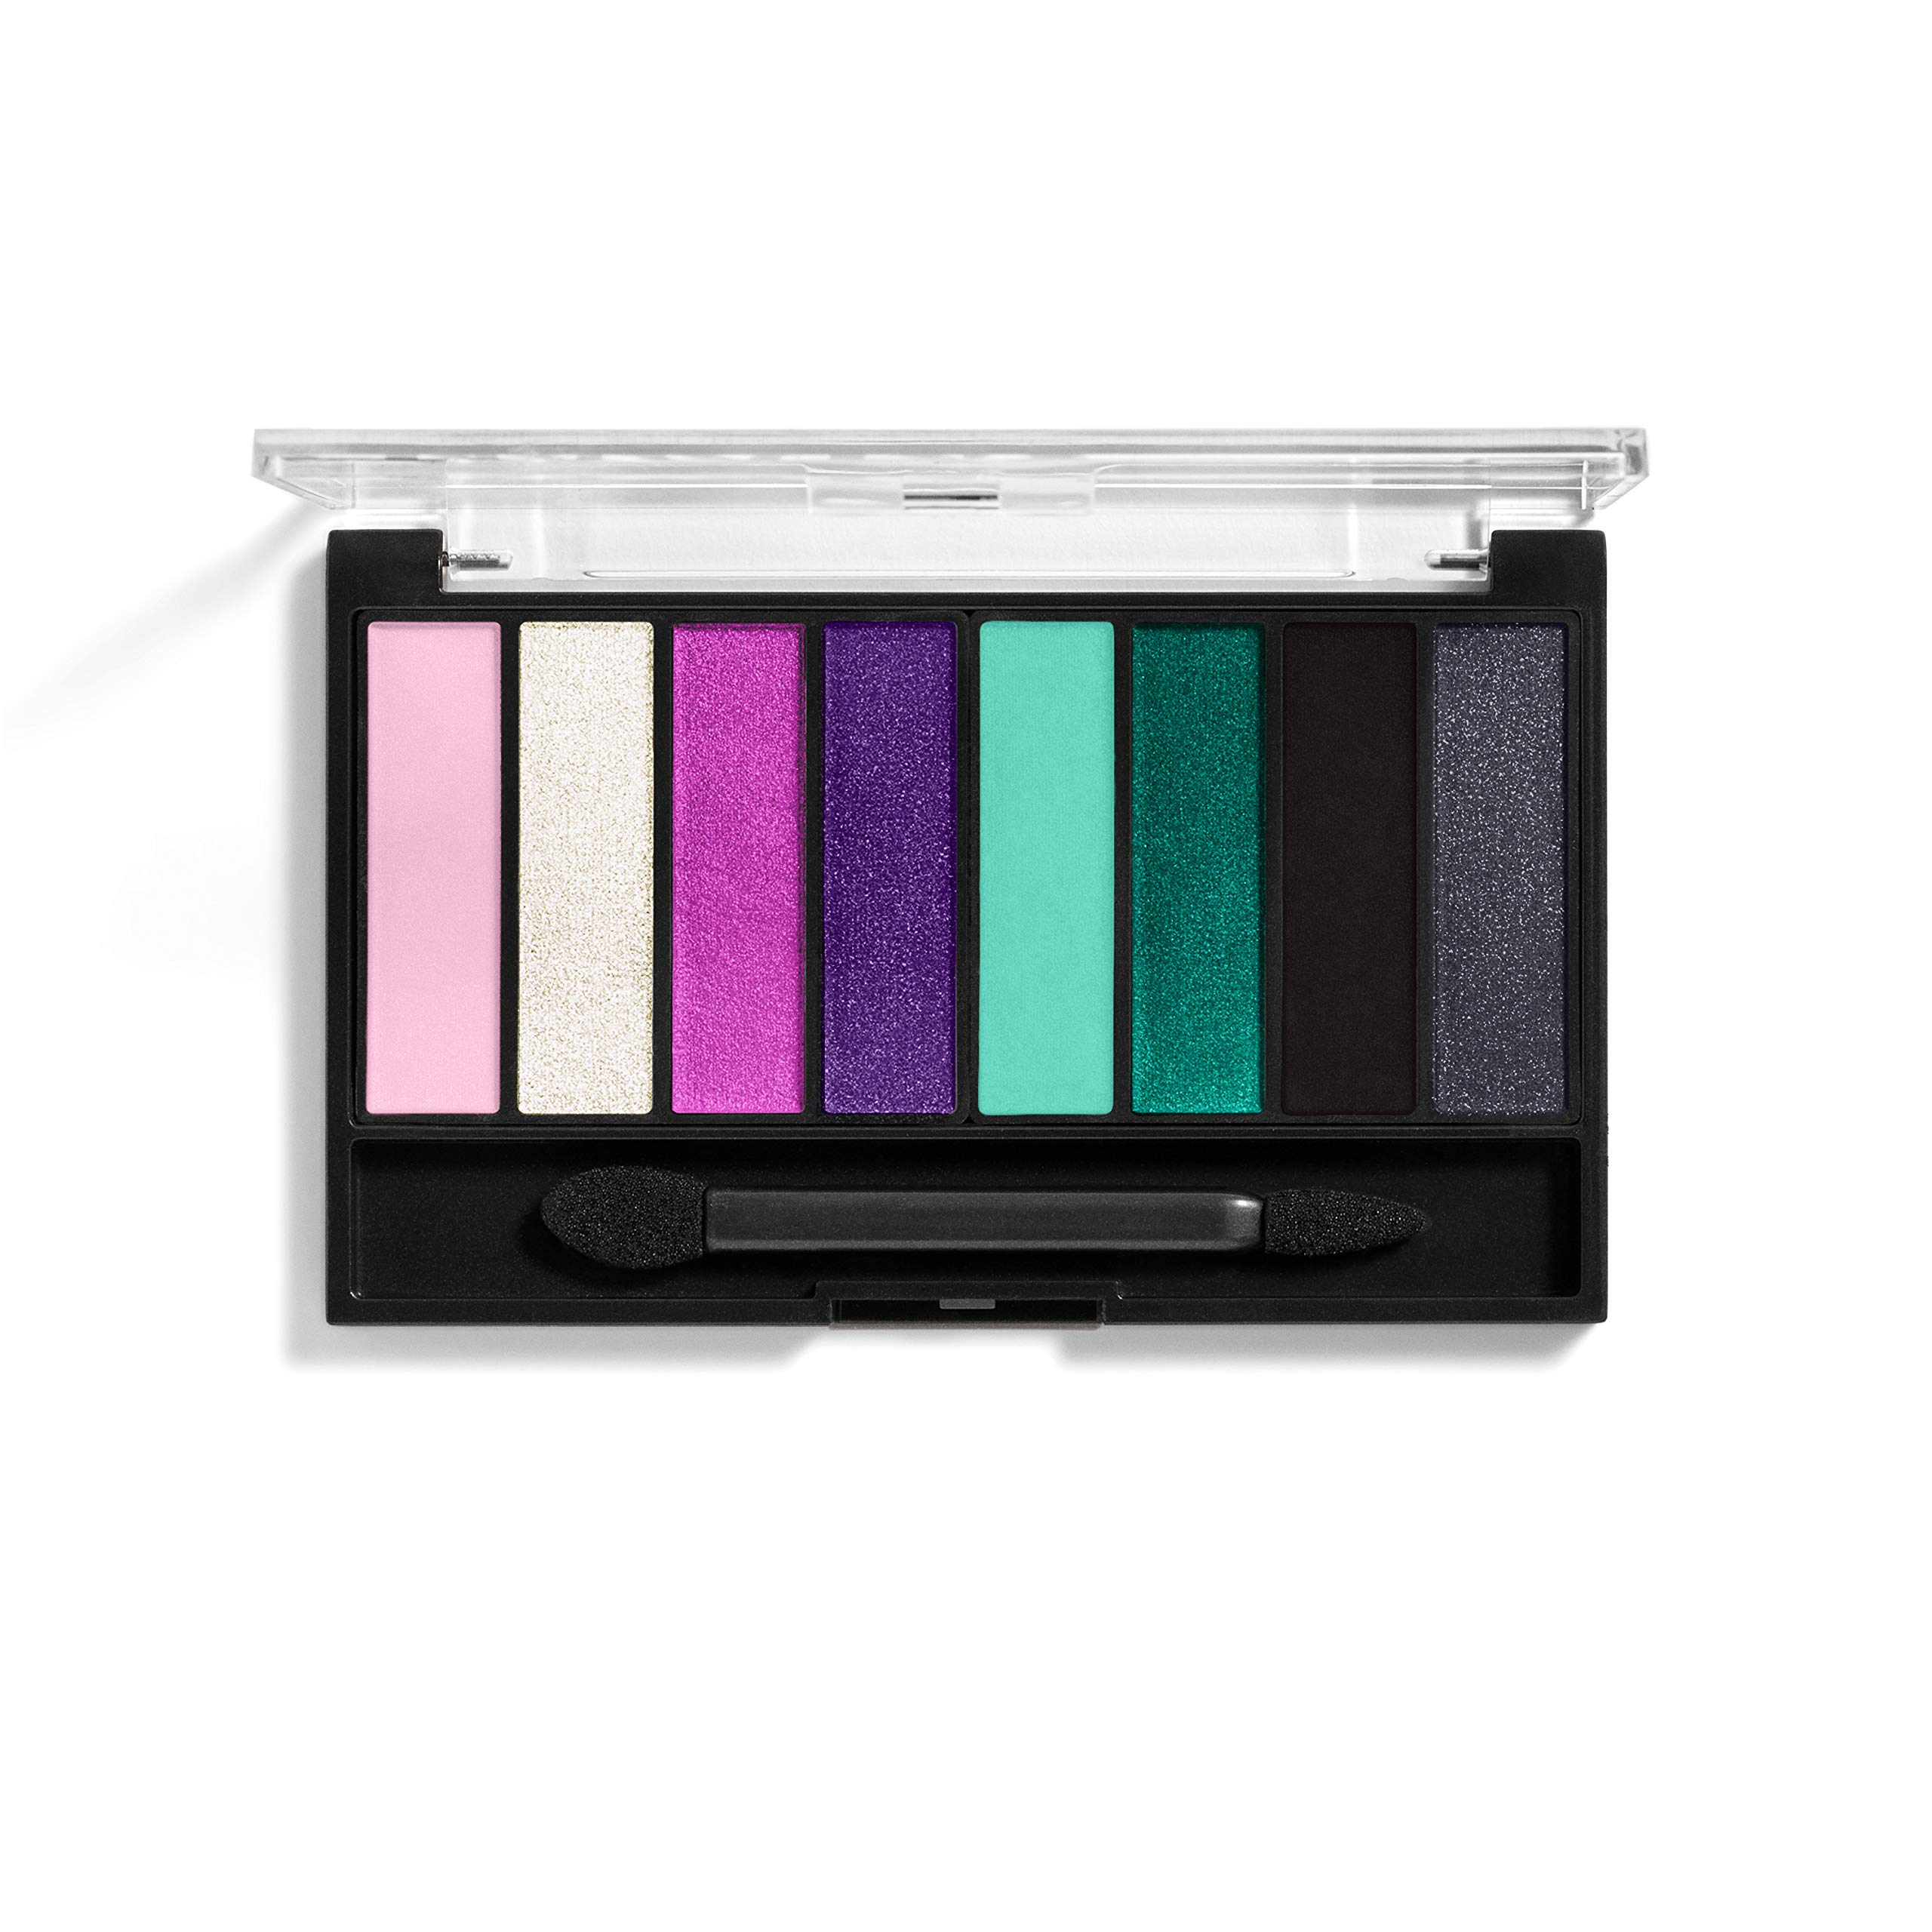 COVERGIRL TruNaked Eye Shadow Palette Pack, That’s Rad, 1 Count